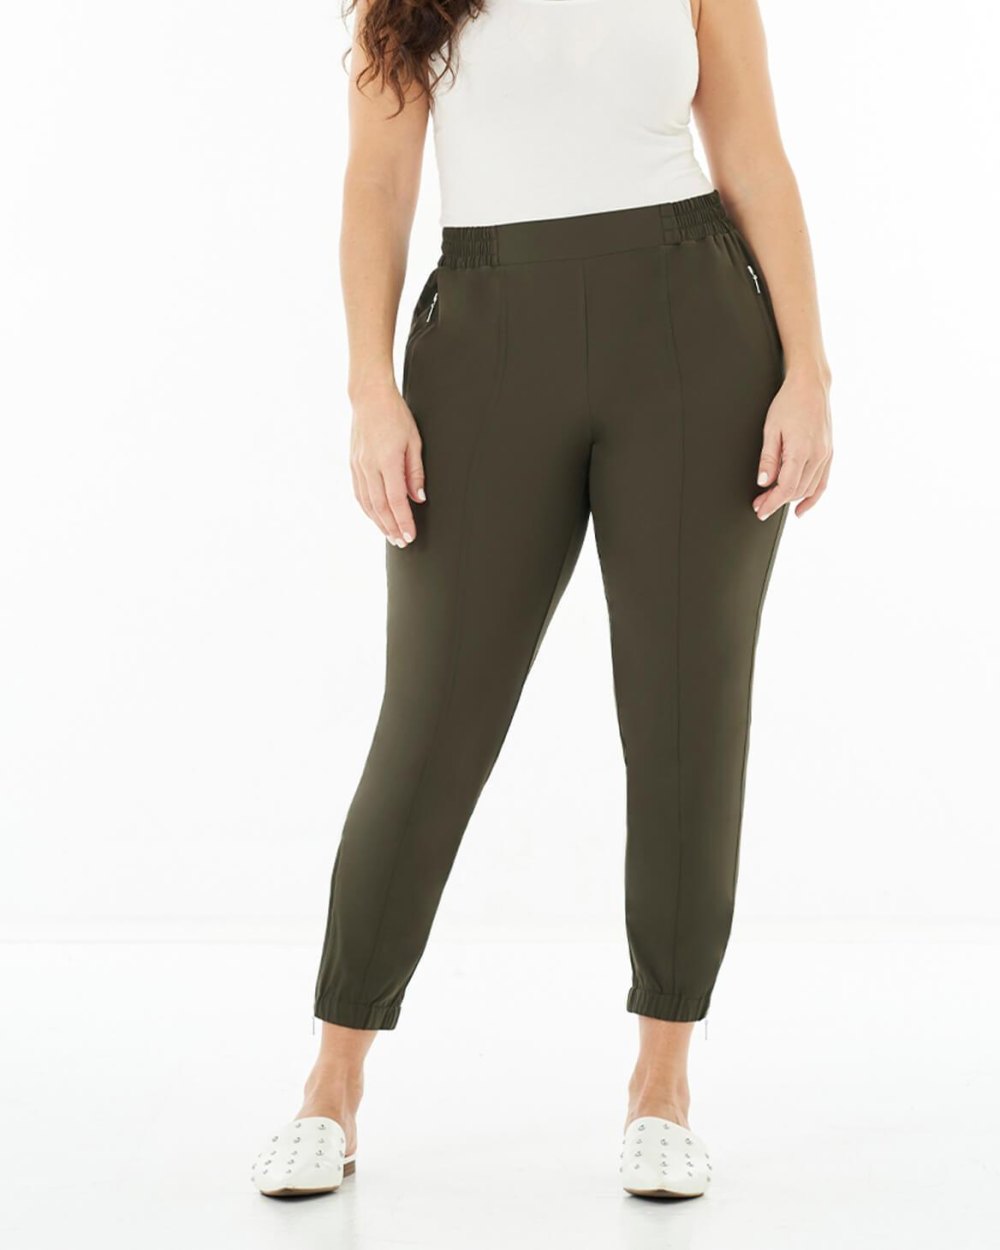 Measure & Made Joggers Are Designed to Fit You Like a Glove | UsWeekly